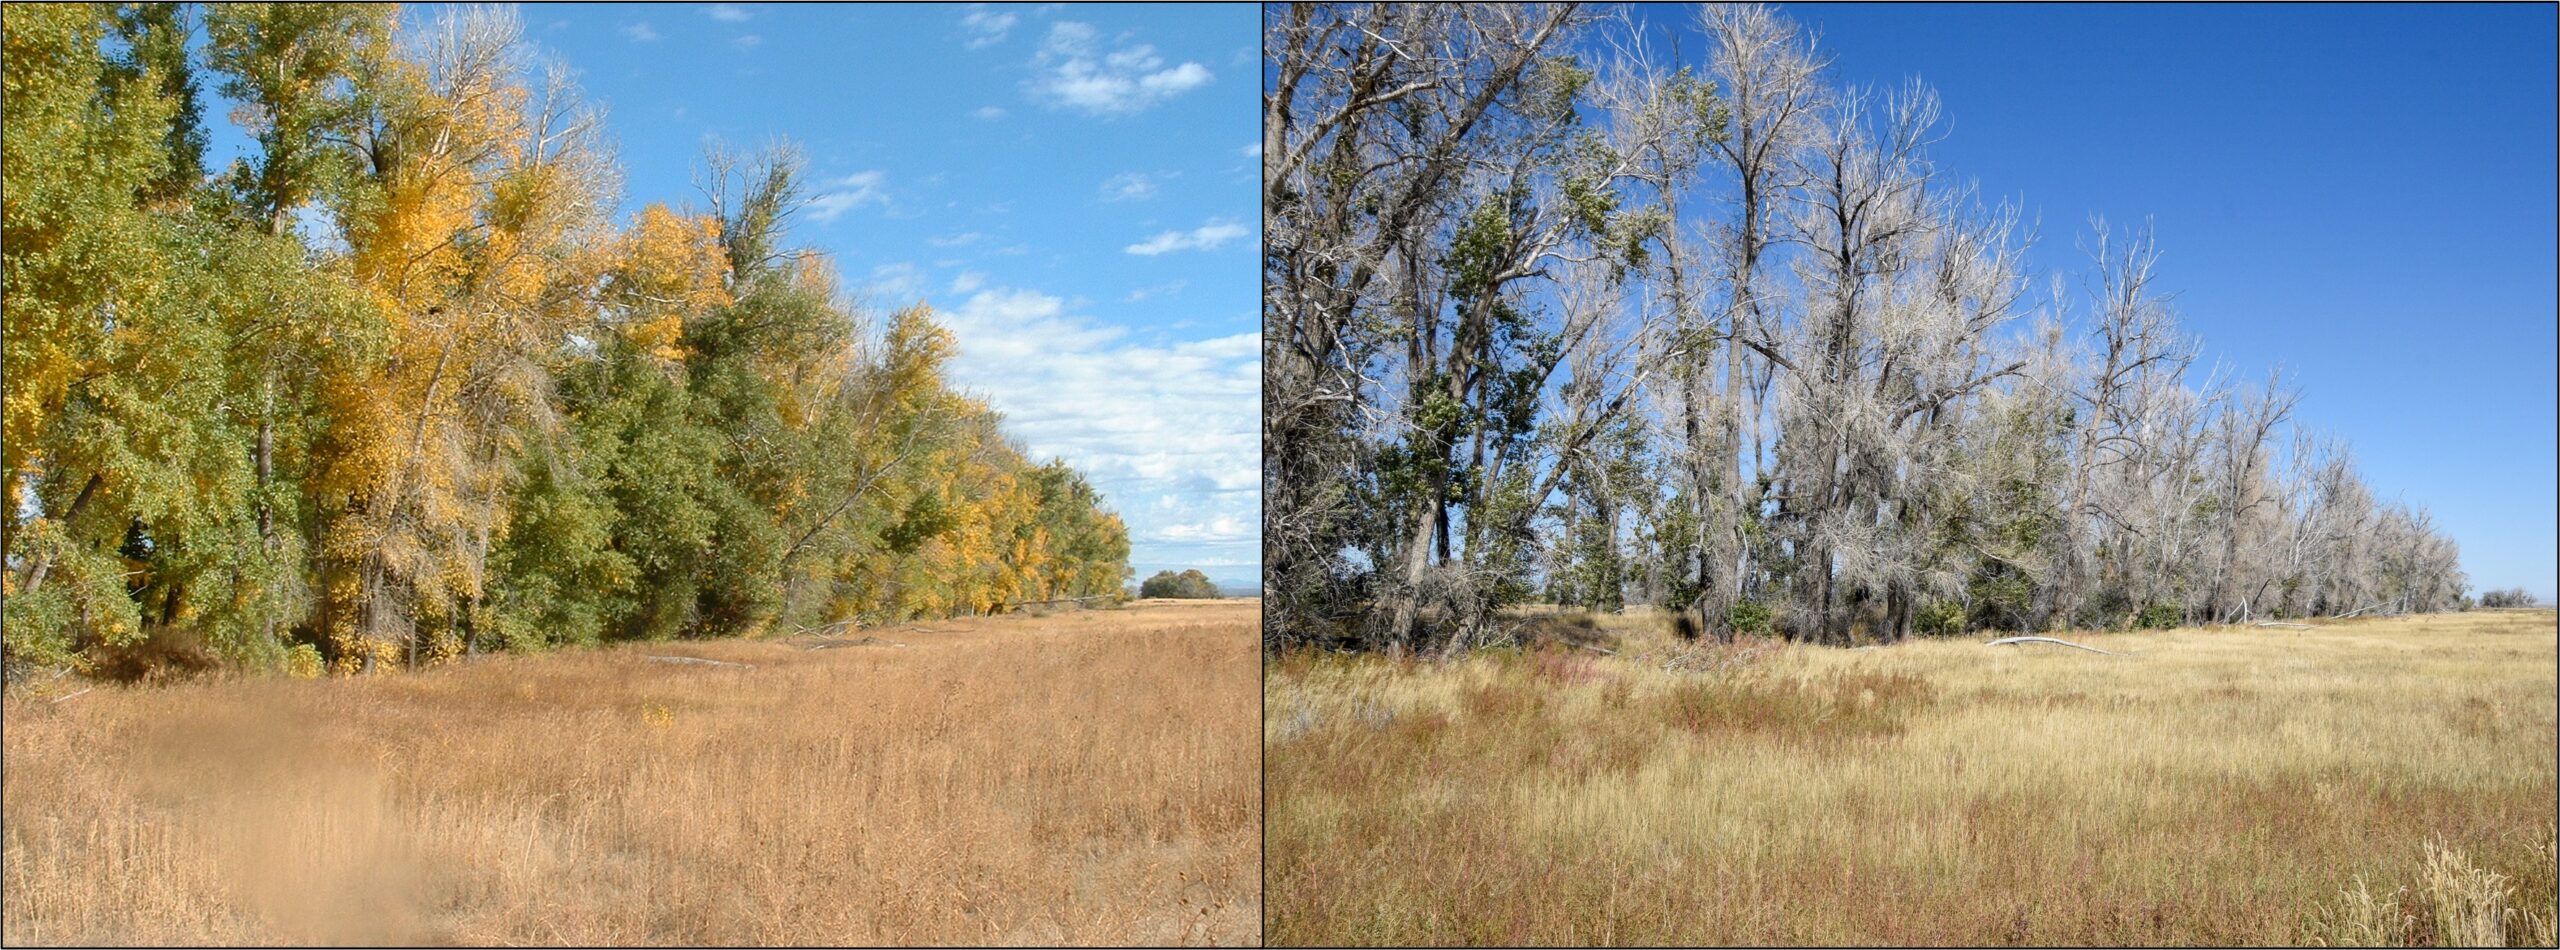 2 images comparing the contrast of vegetation health and its decrease over 17 years.